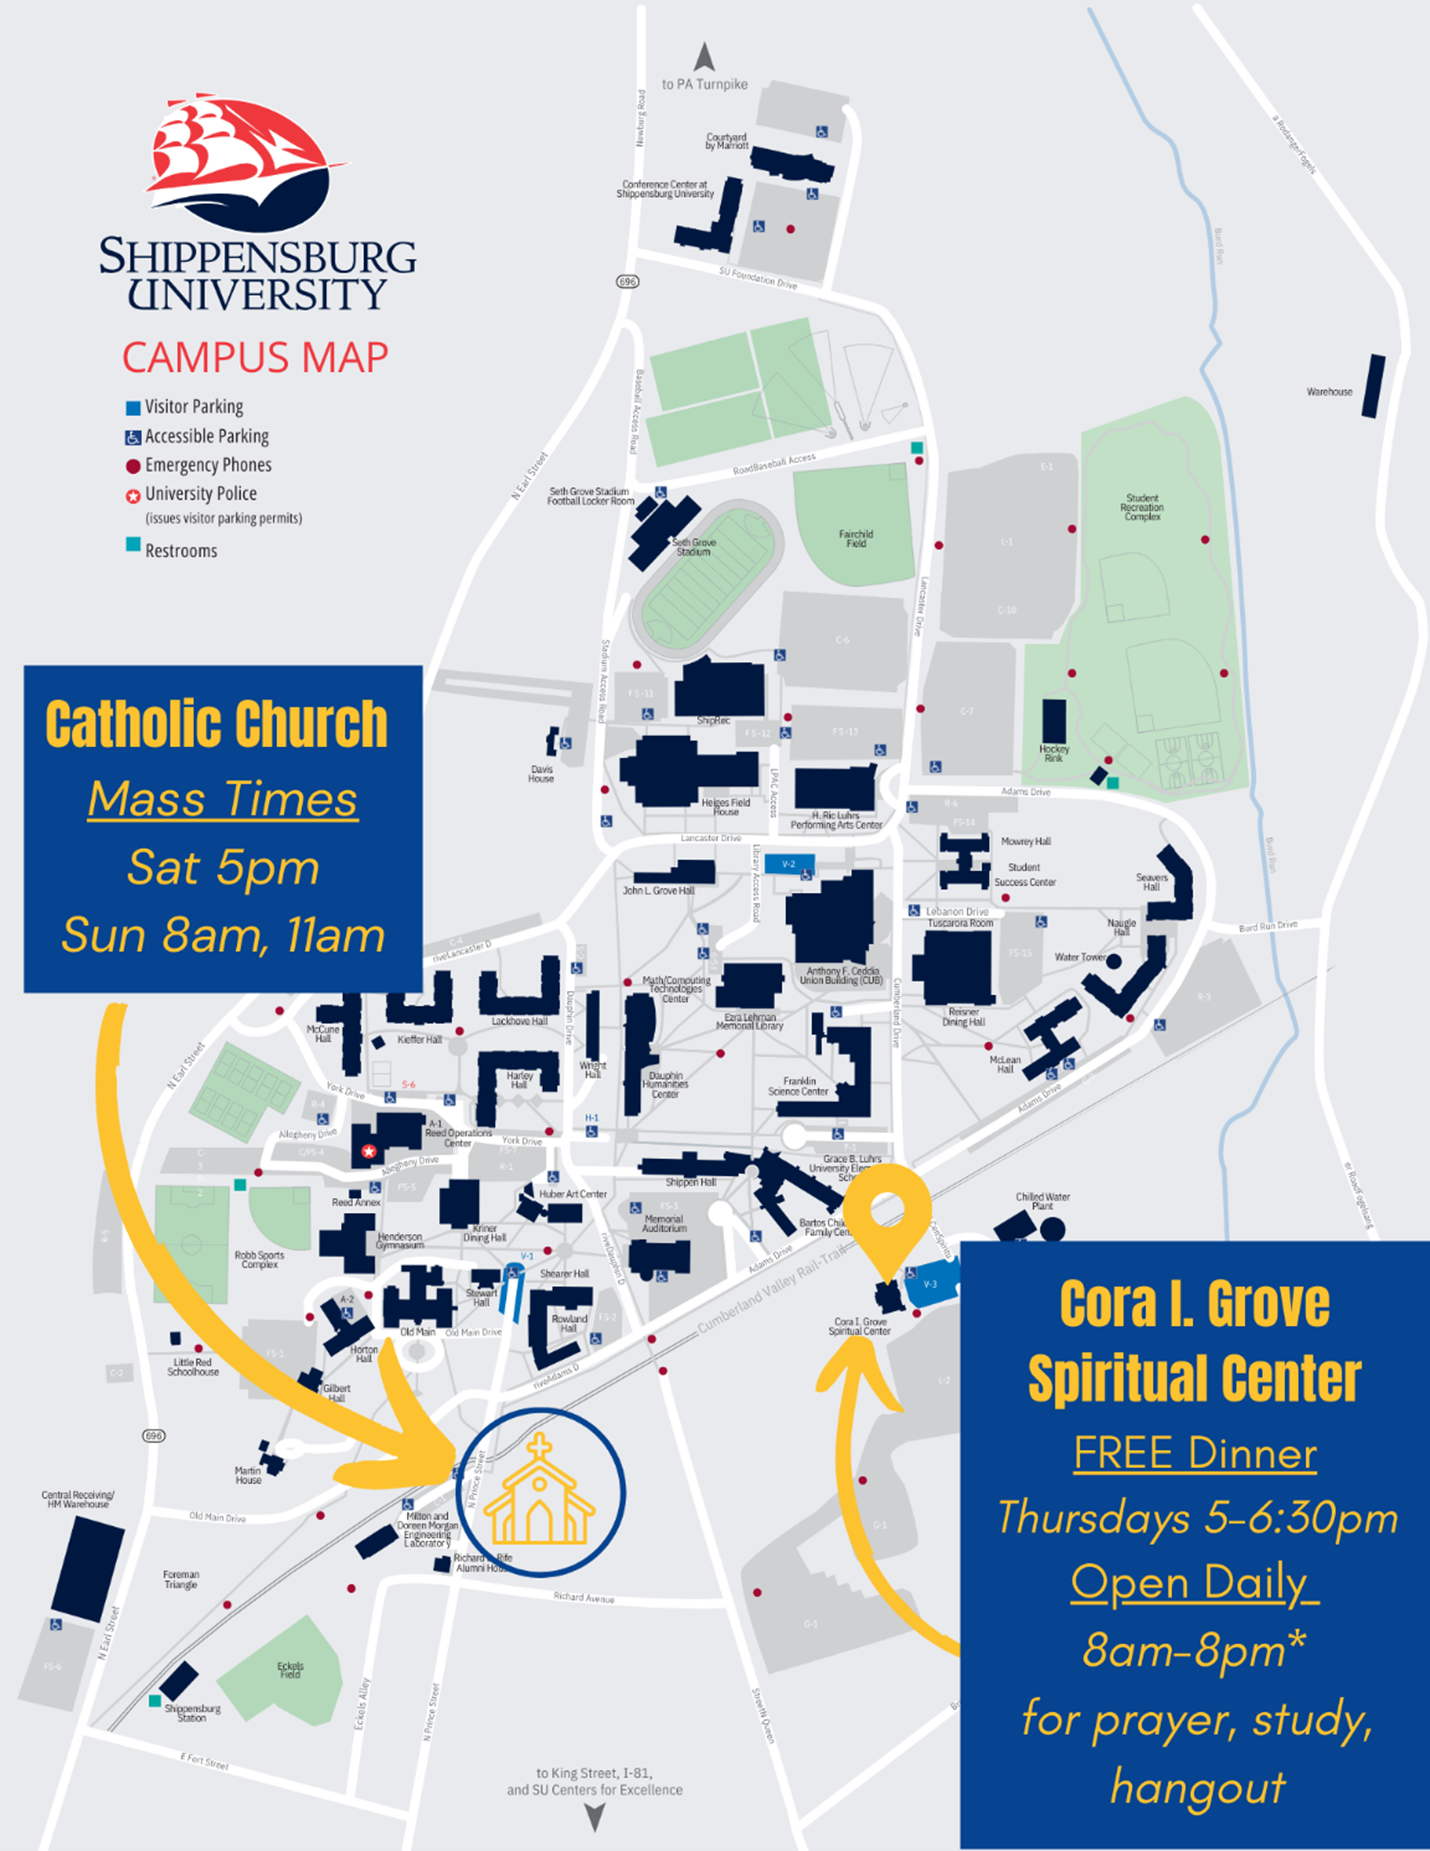 map of campus with location for services marked